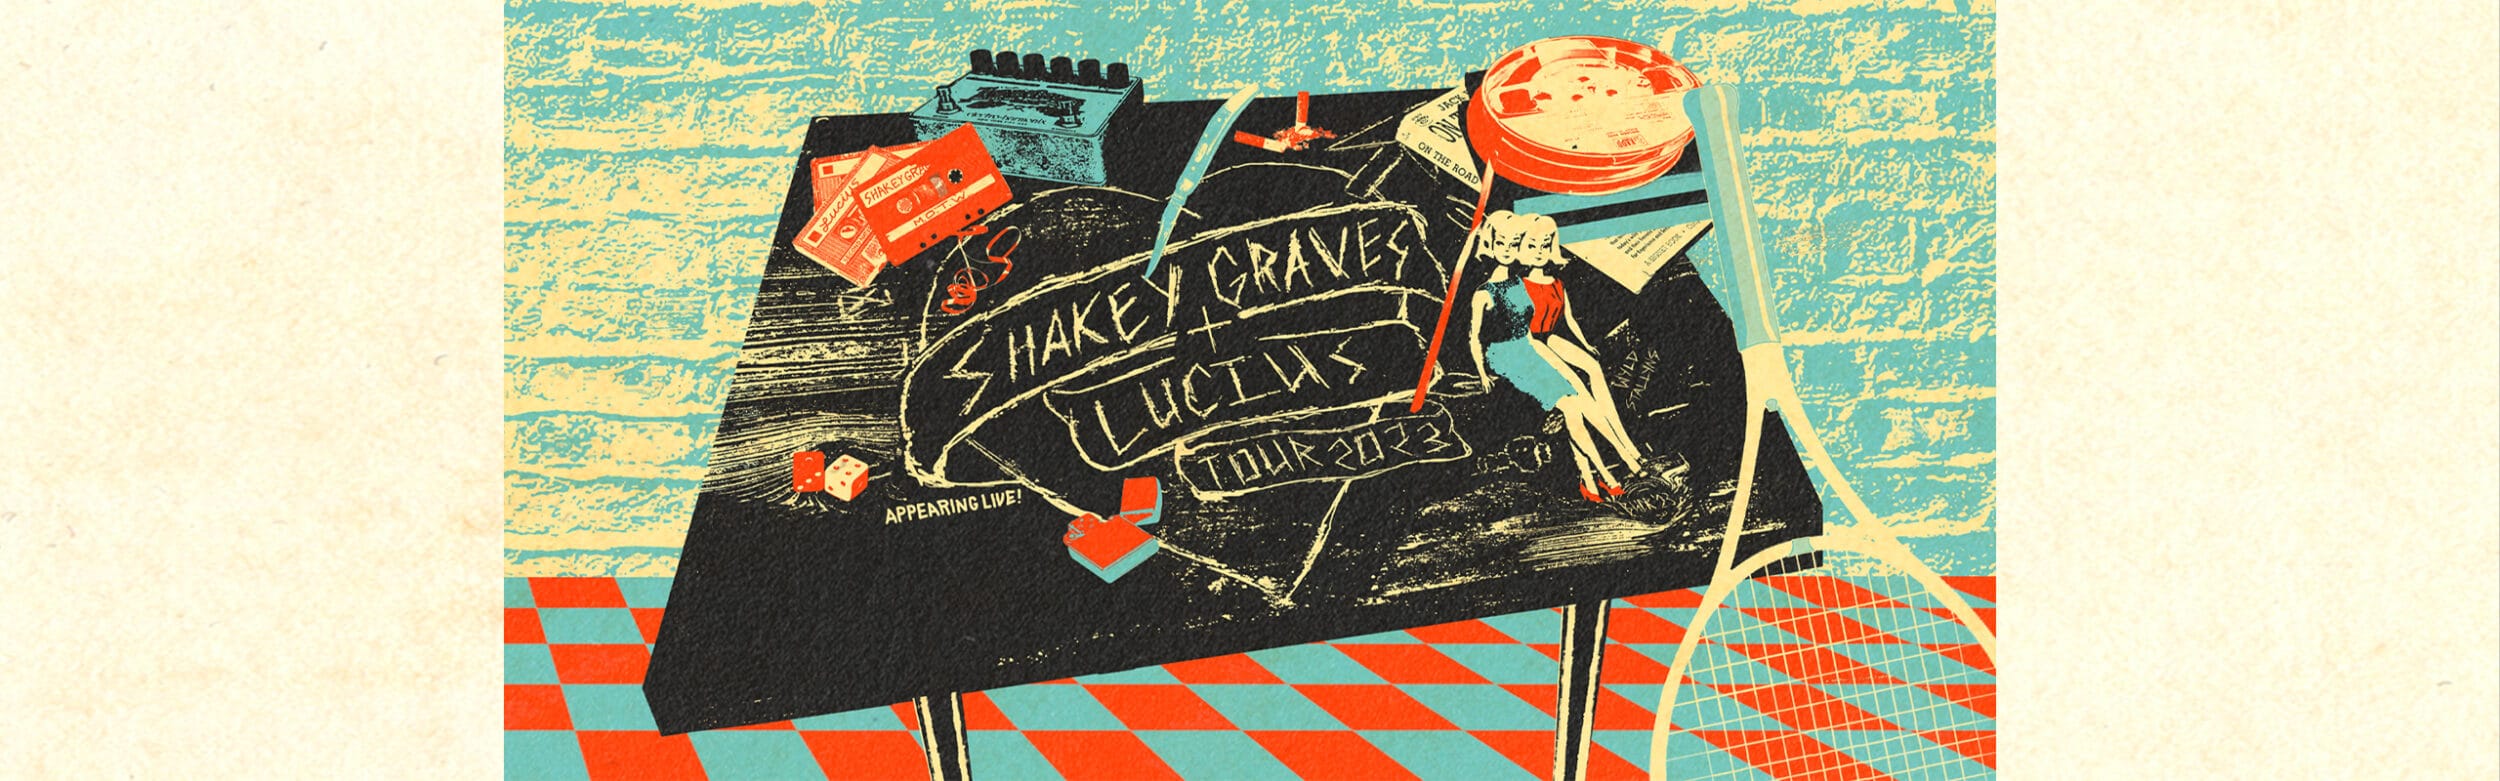 Shakey Graves and Lucius